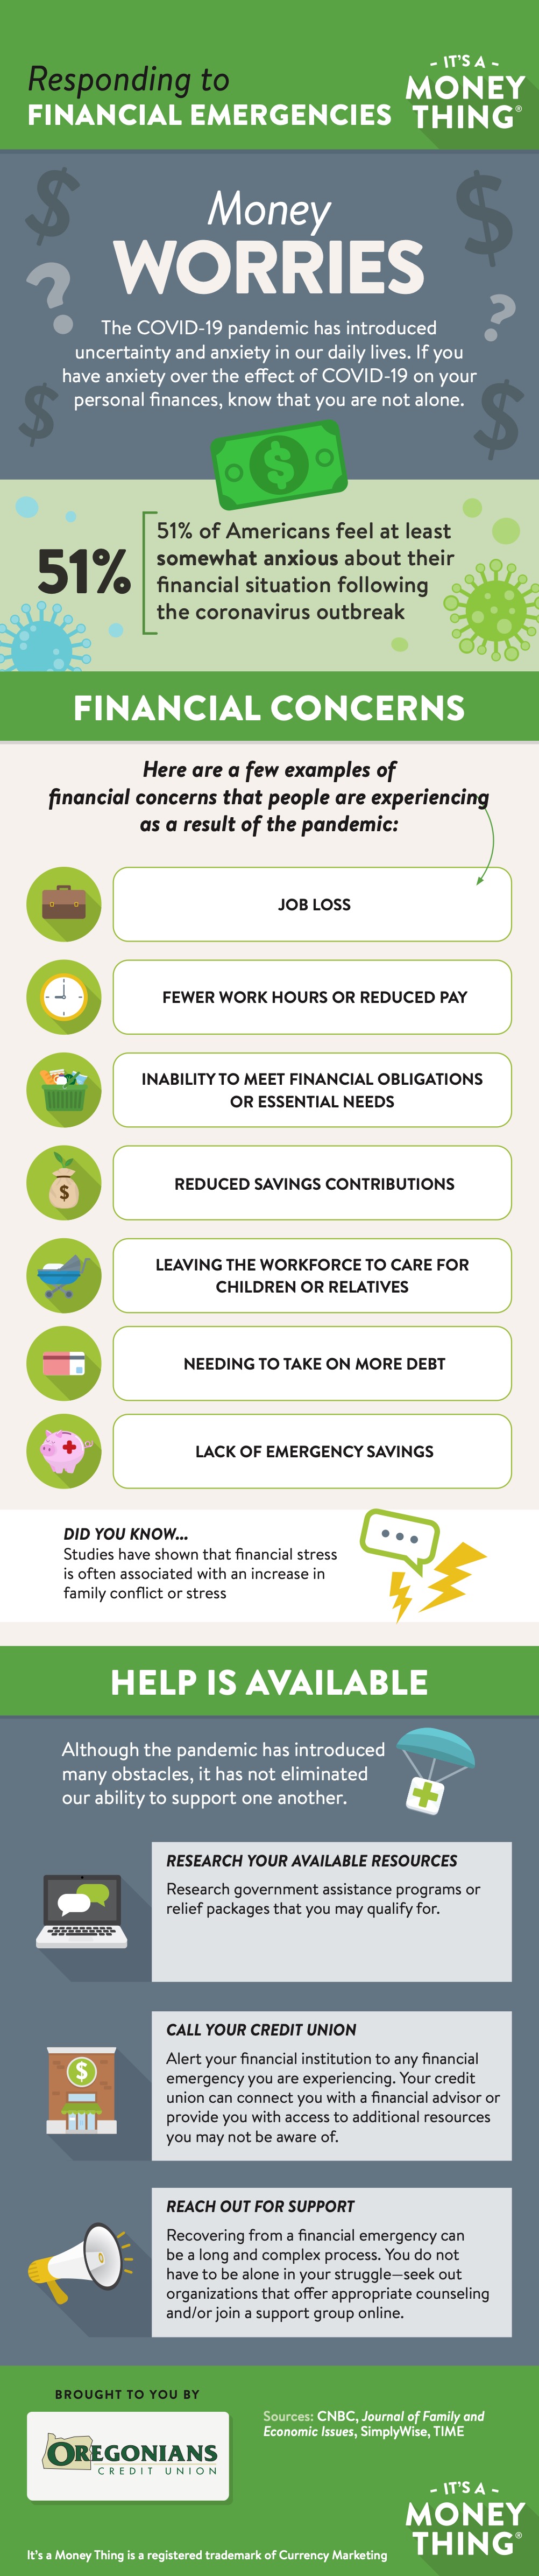 Responding to financial emergencies image - infographic